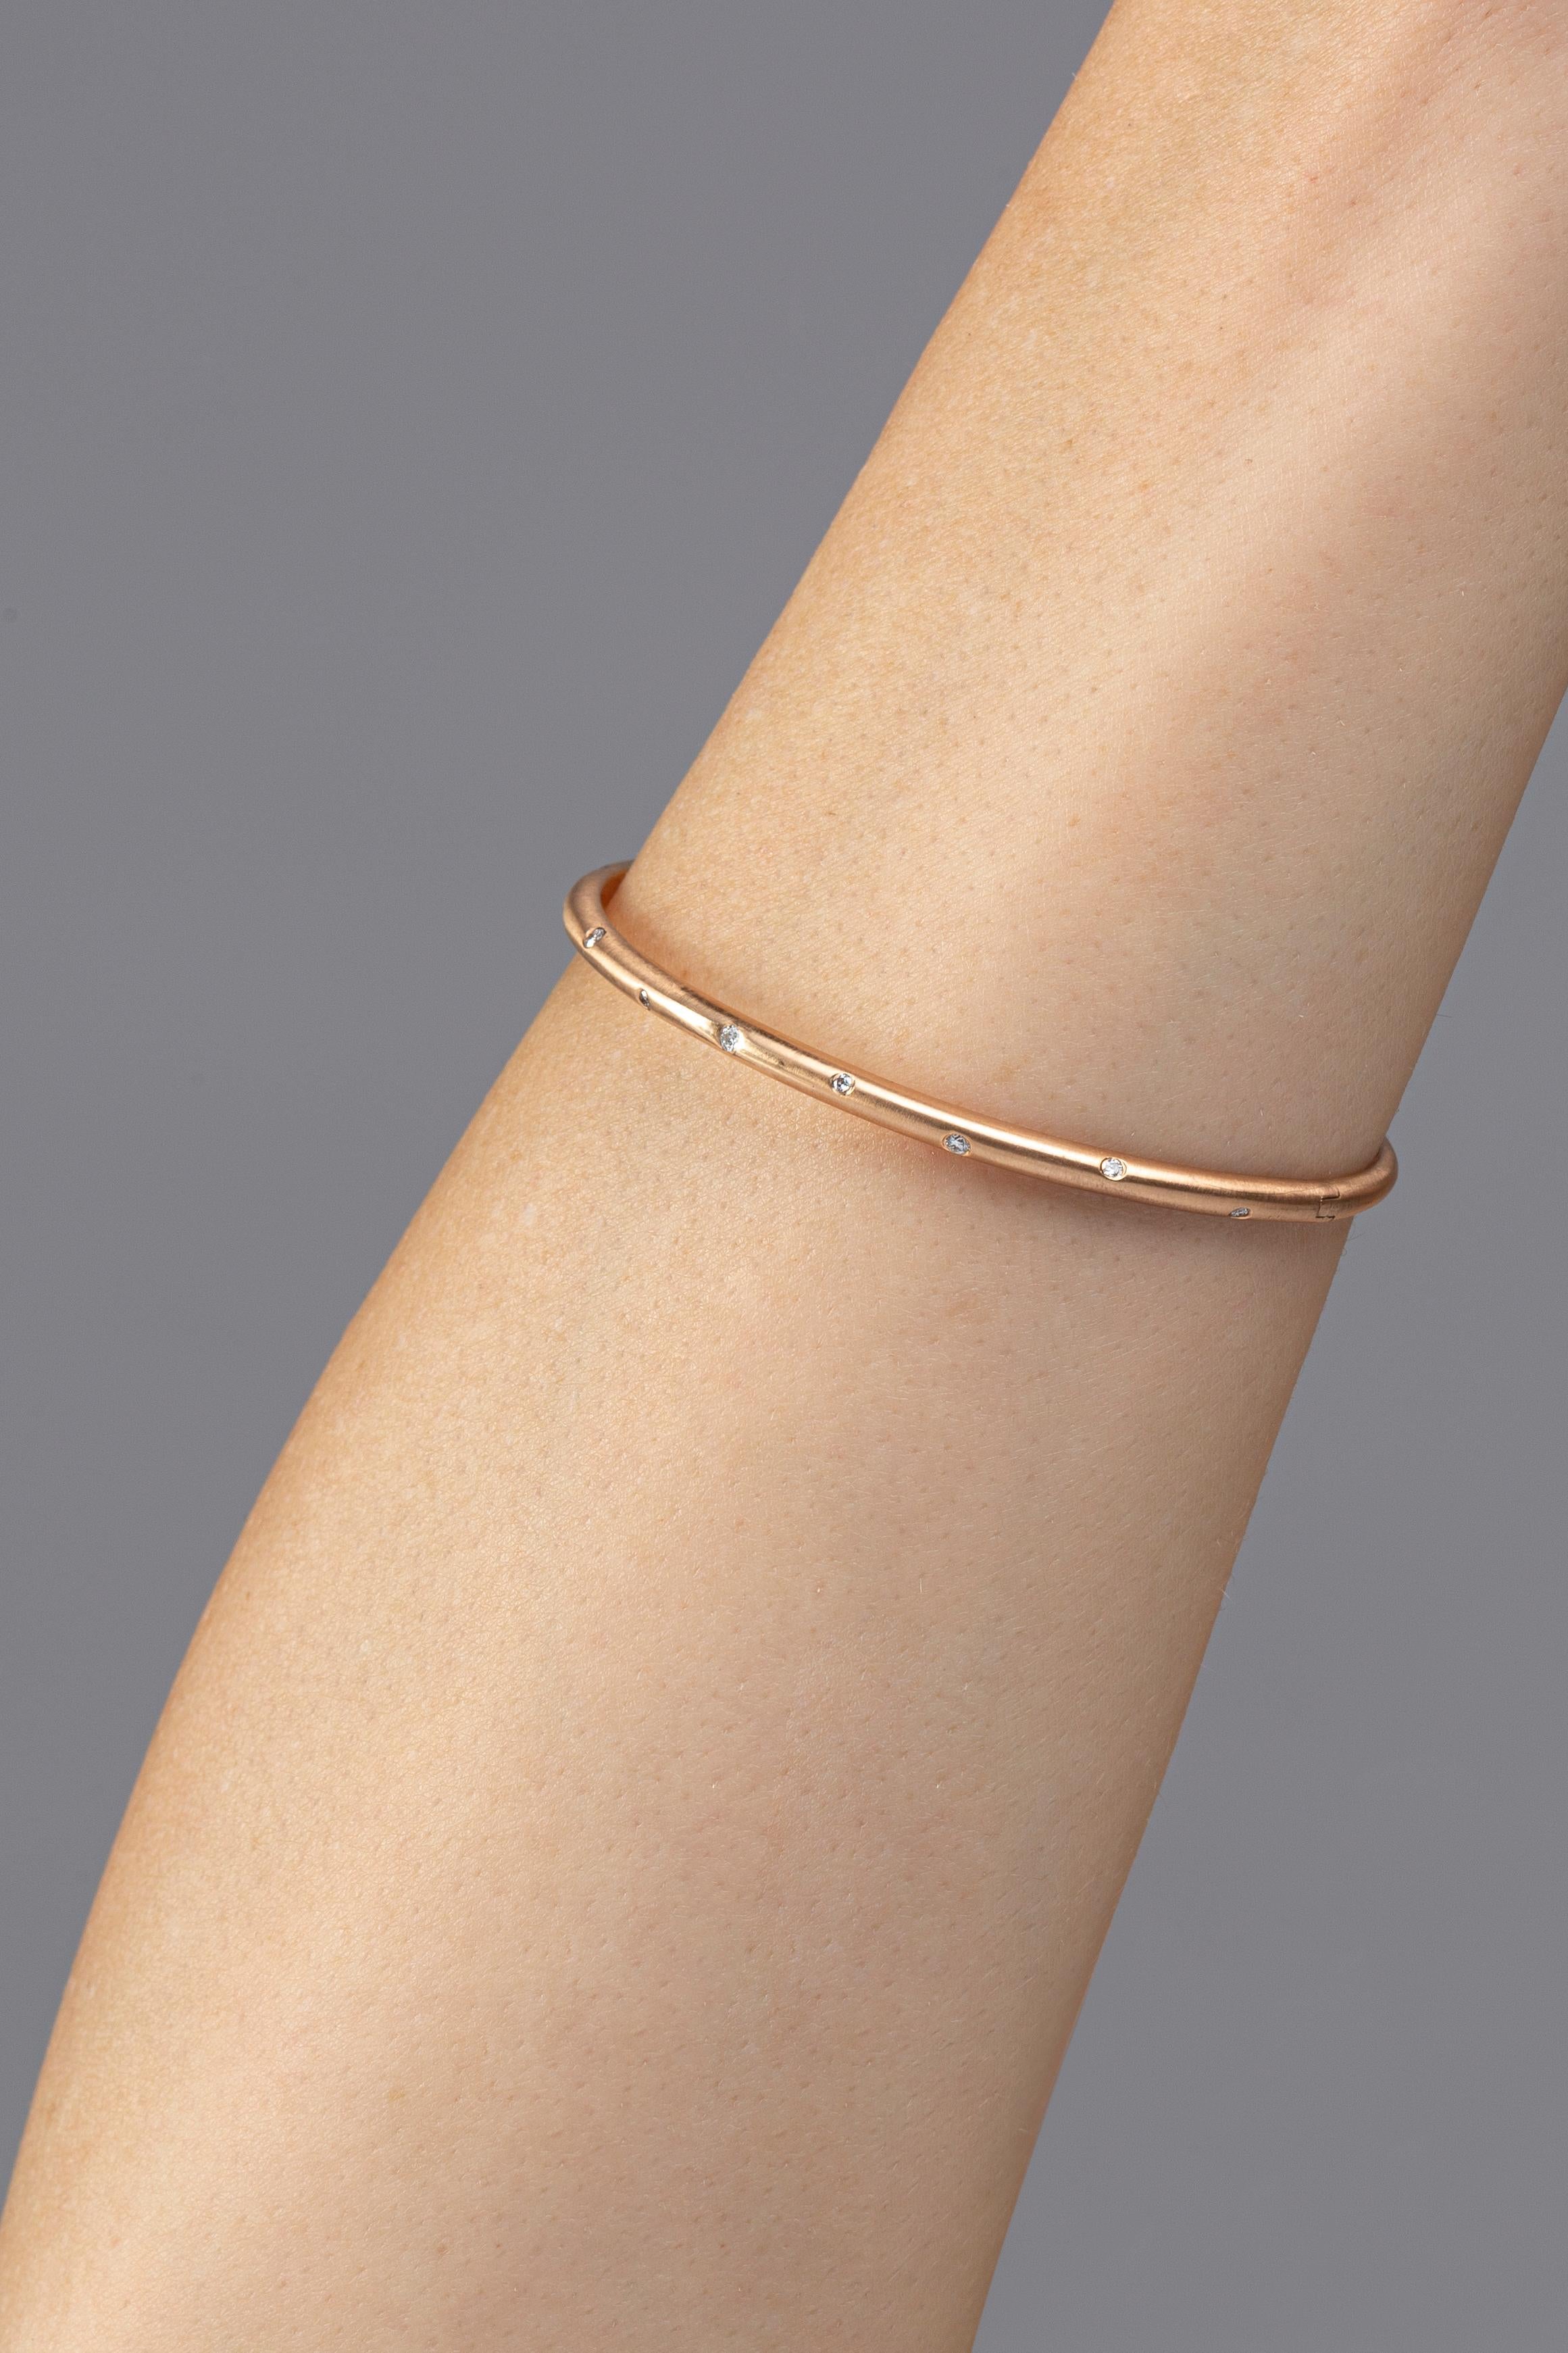 Alex Jona design collection, hand crafted in Italy, 18 karat brushed rose gold bangle bracelet with 9 white diamonds, weighing 0.14 carats in total.

Alex Jona jewels stand out, not only for their special design and for the excellent quality of the